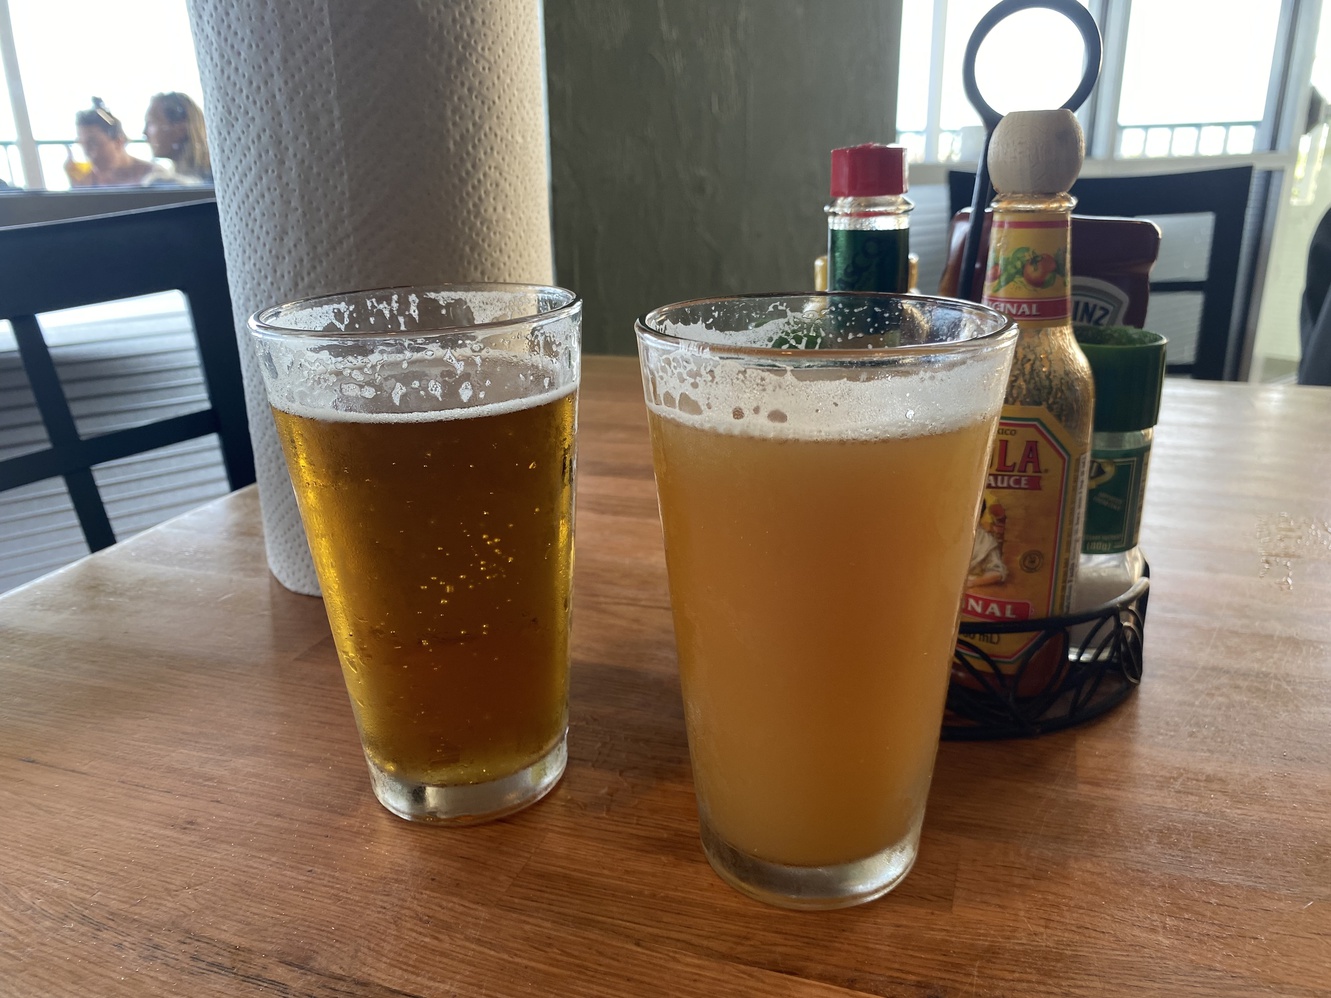 On the left is the Goose Island IPA, and on the right is the
      local Ankro IPA.